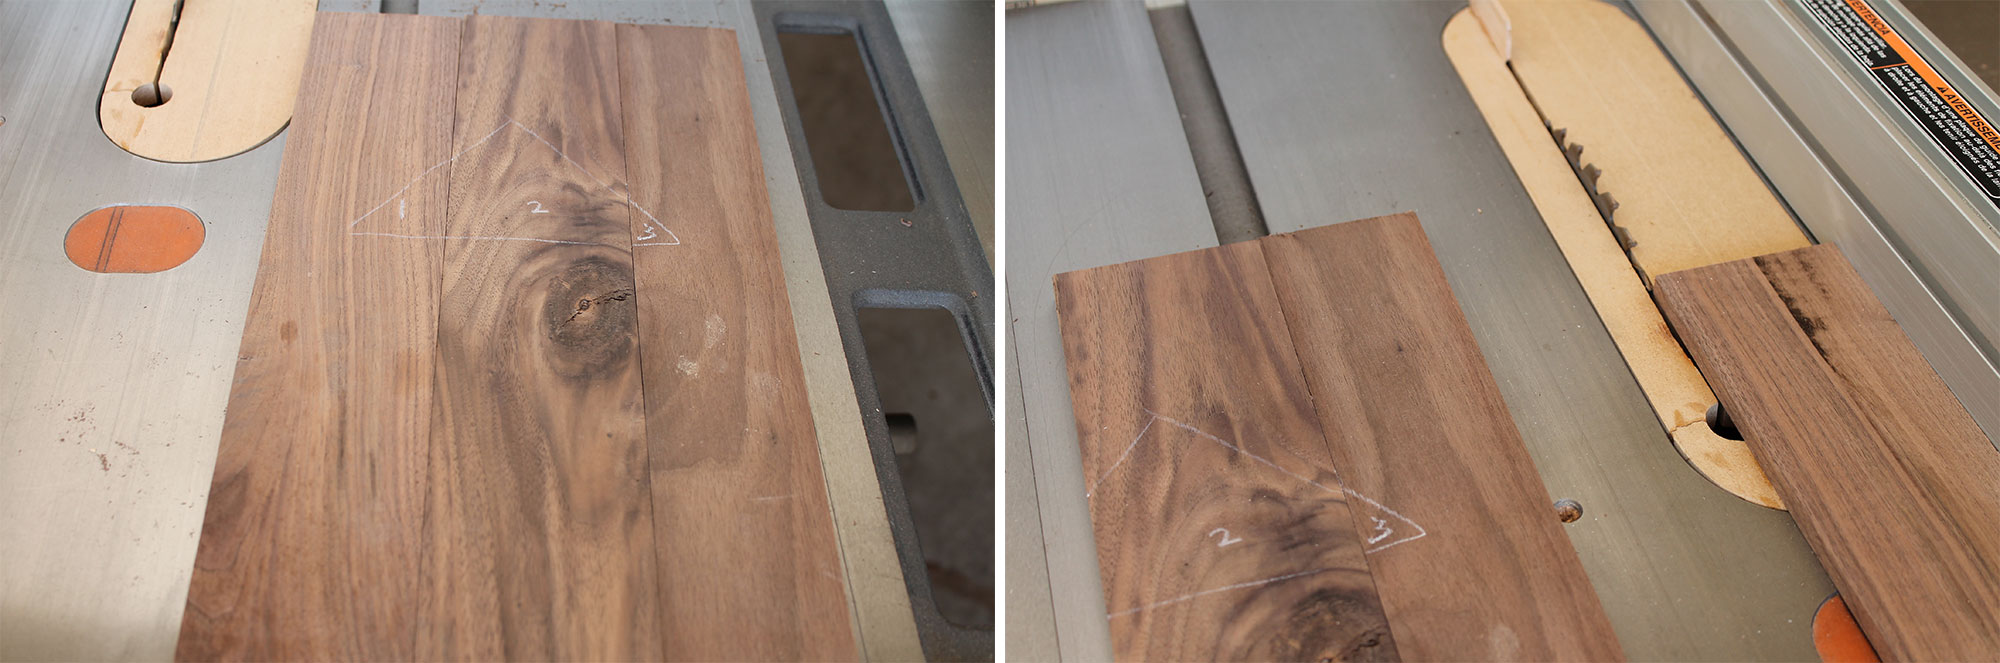 Left: Orient the pieces. Right: Flip the board to rip the right edge.